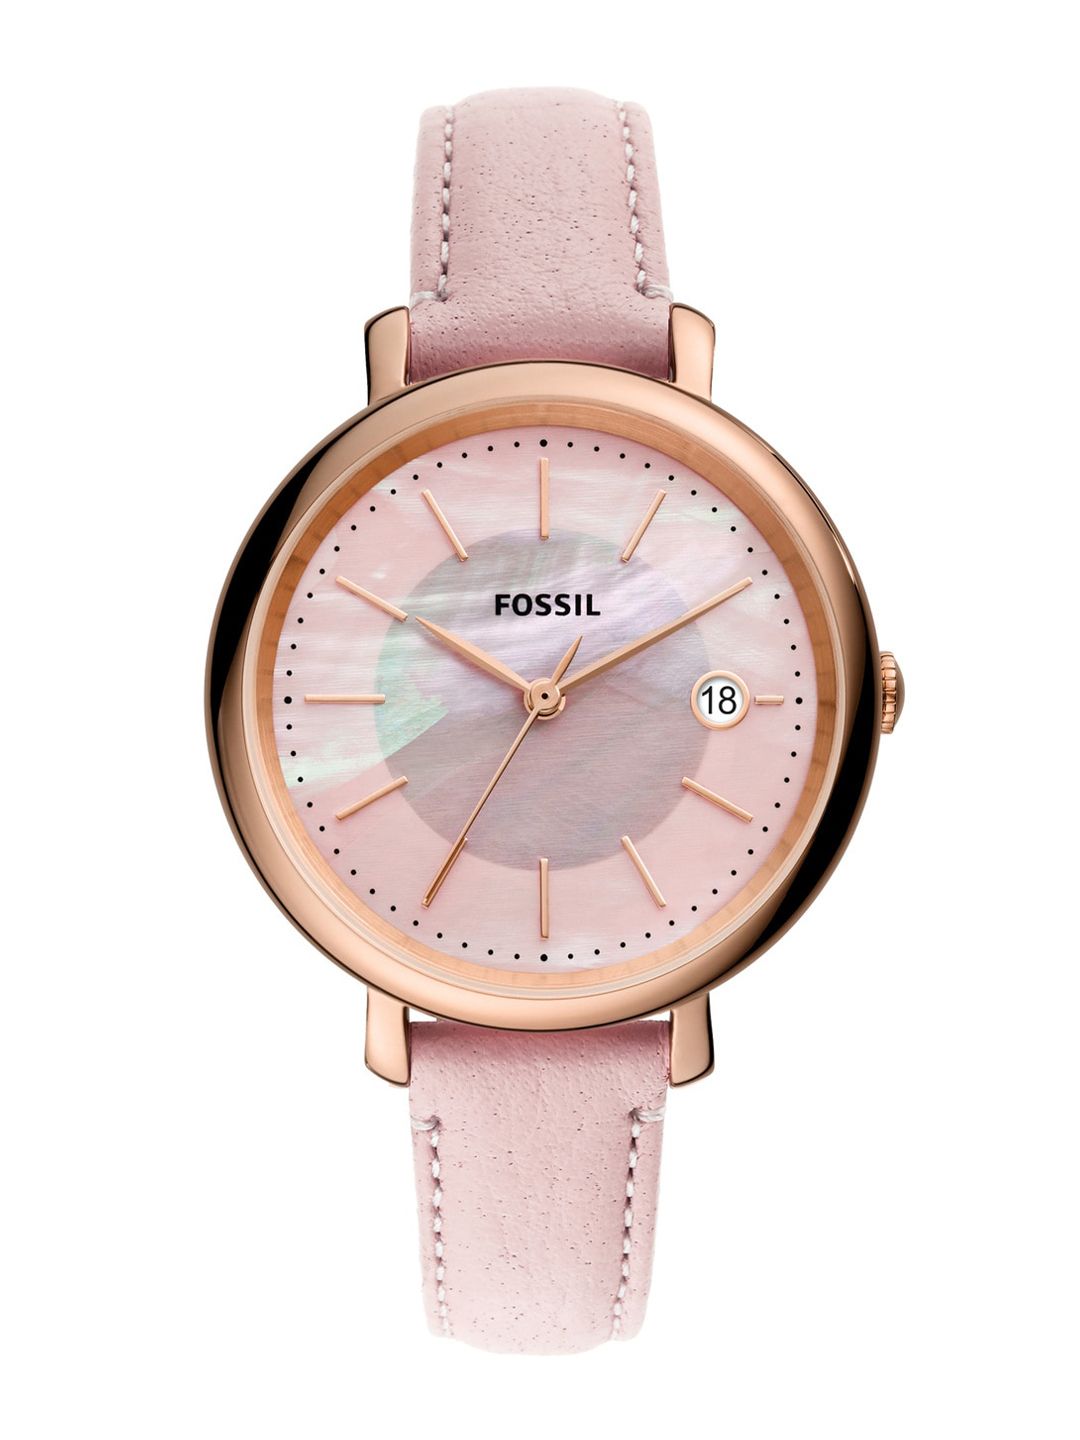 Fossil Women Pink Dial & Pink Leather Straps Analogue Watch ES5092 Price in India